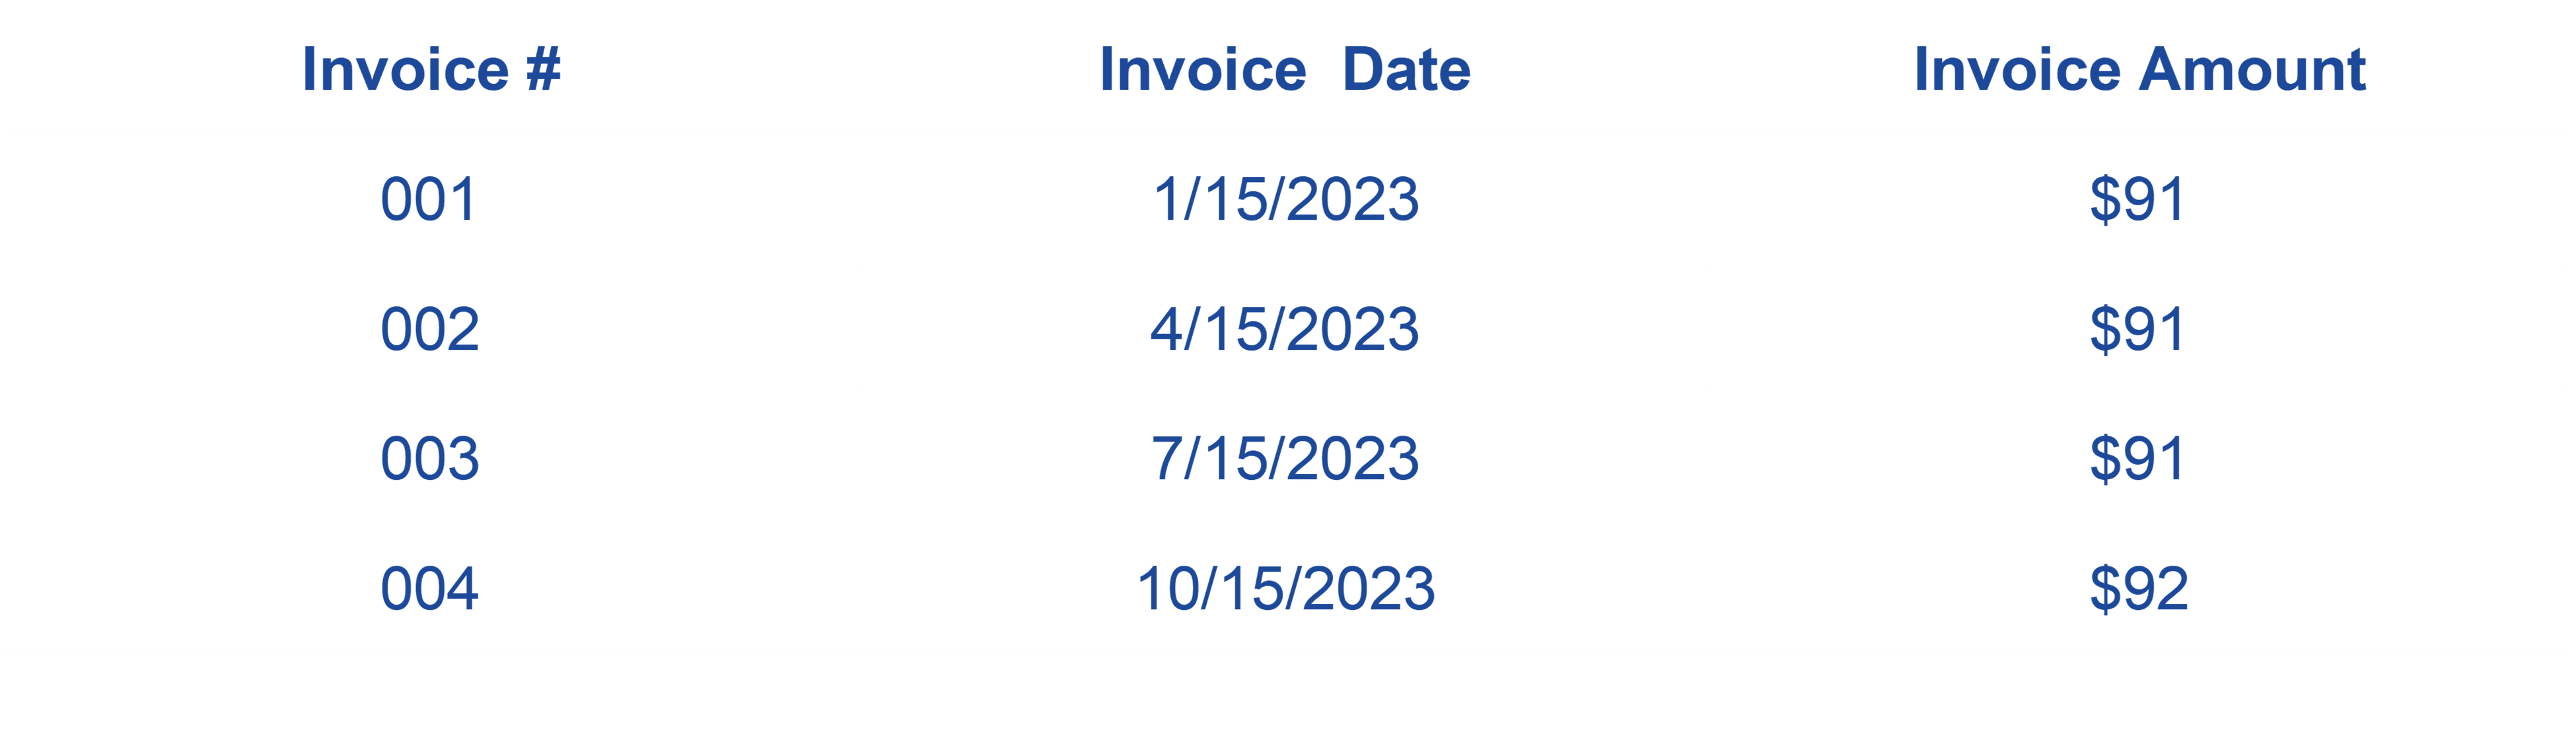 quarterly invoicing for billing automation SaaS